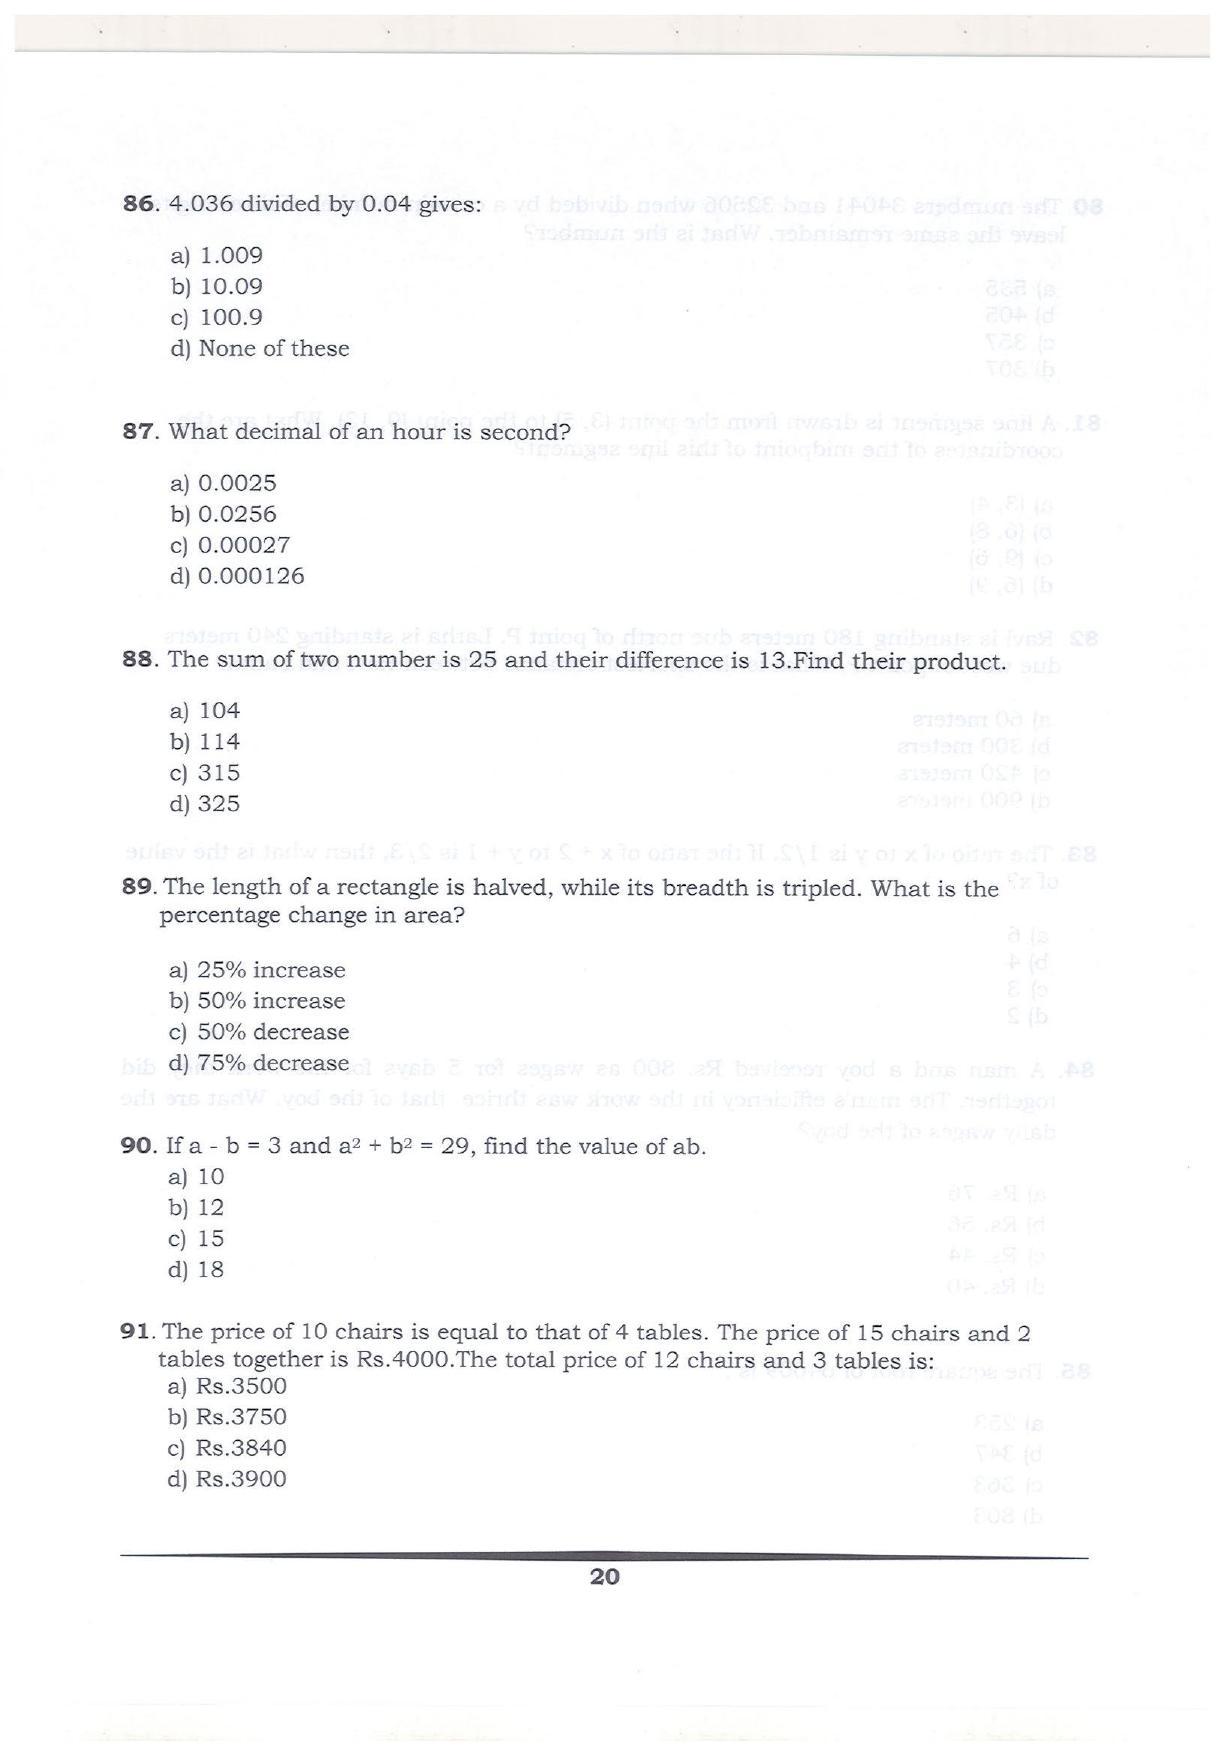 KMAT Question Papers - February 2018 - Page 19